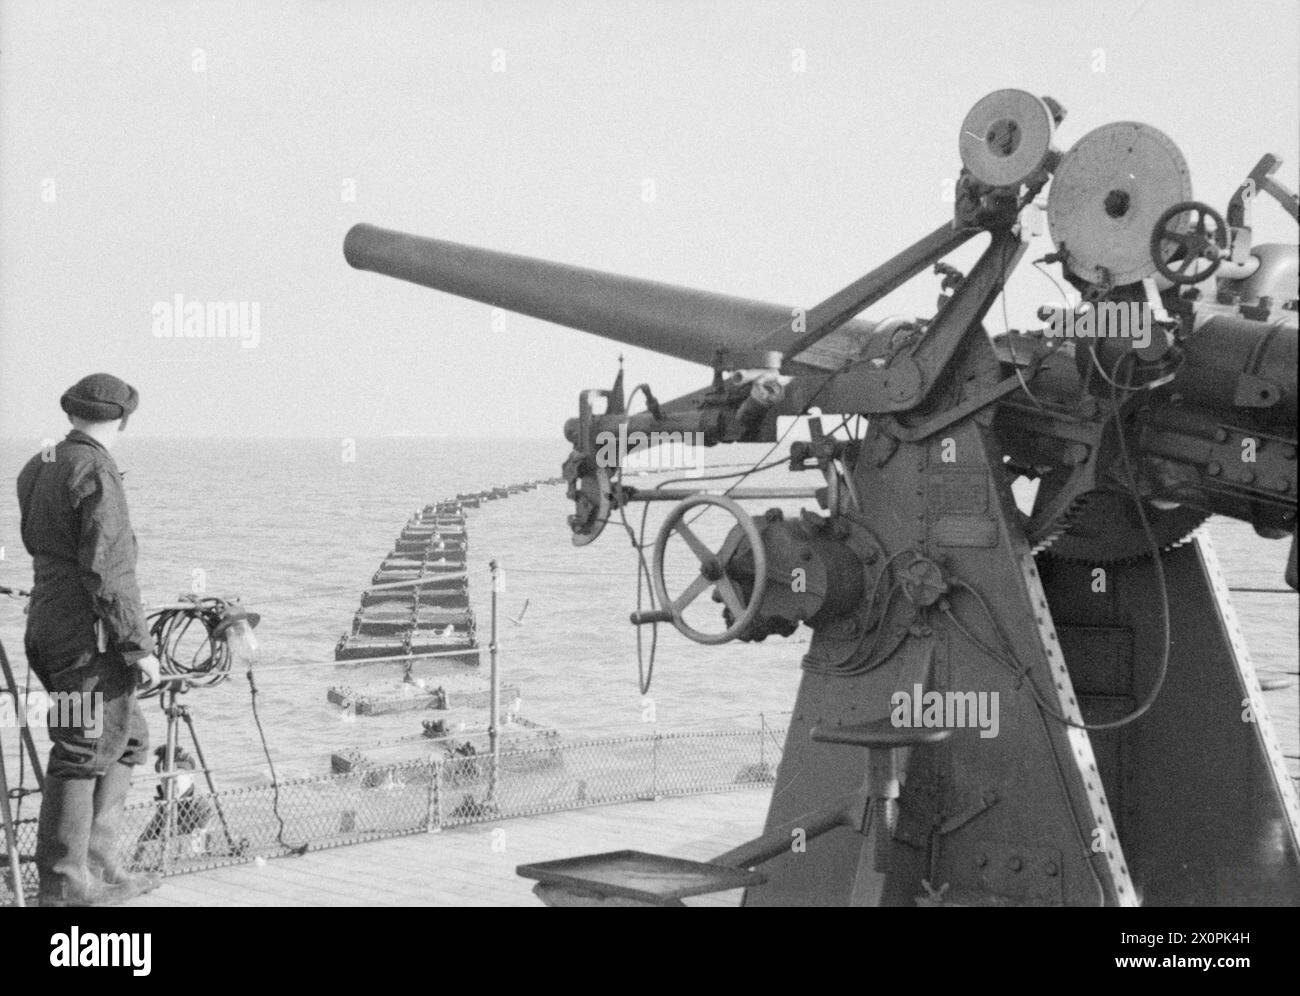 BOOM DEFENCE. 1940, THAMES ESTUARY BOOM DEFENCE, DEFENDING THE PORT OF LONDON, THE NAVAL HARBOURS OF CHATHAM AND SHEERNESS. HEAVY TIDES IN THE ESTUARY AS WELL AS CONSTANT AIR ATTACKS NECESSITATE FREQUENT CHECK UPS ON THE CONDITION OF THE BOOM DEFENCES. - The 3' high-angle gun that guards the gate ship of the estuary boom defence. Spikes and anti-boats baulks are seen behind Stock Photo